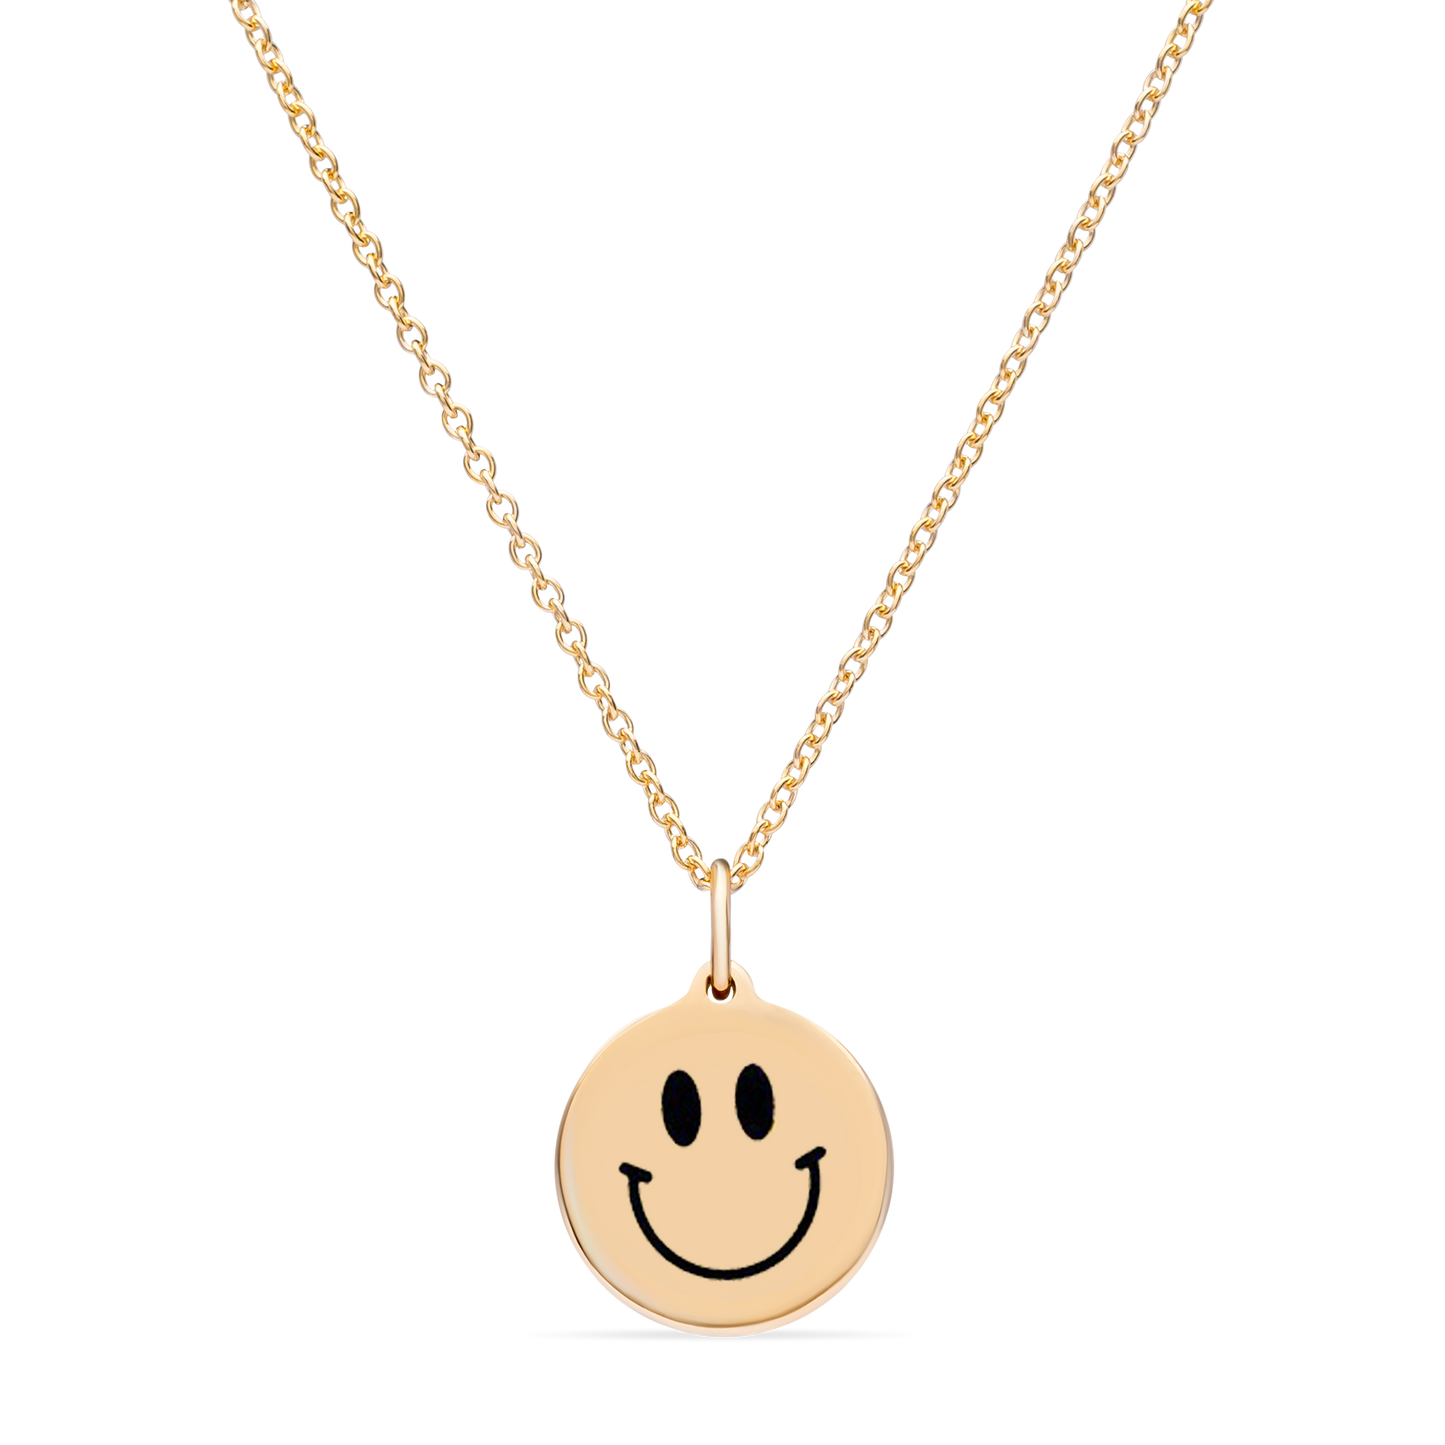 MINI SMILEY FACE CHARM 14k vermeil or sterling silver